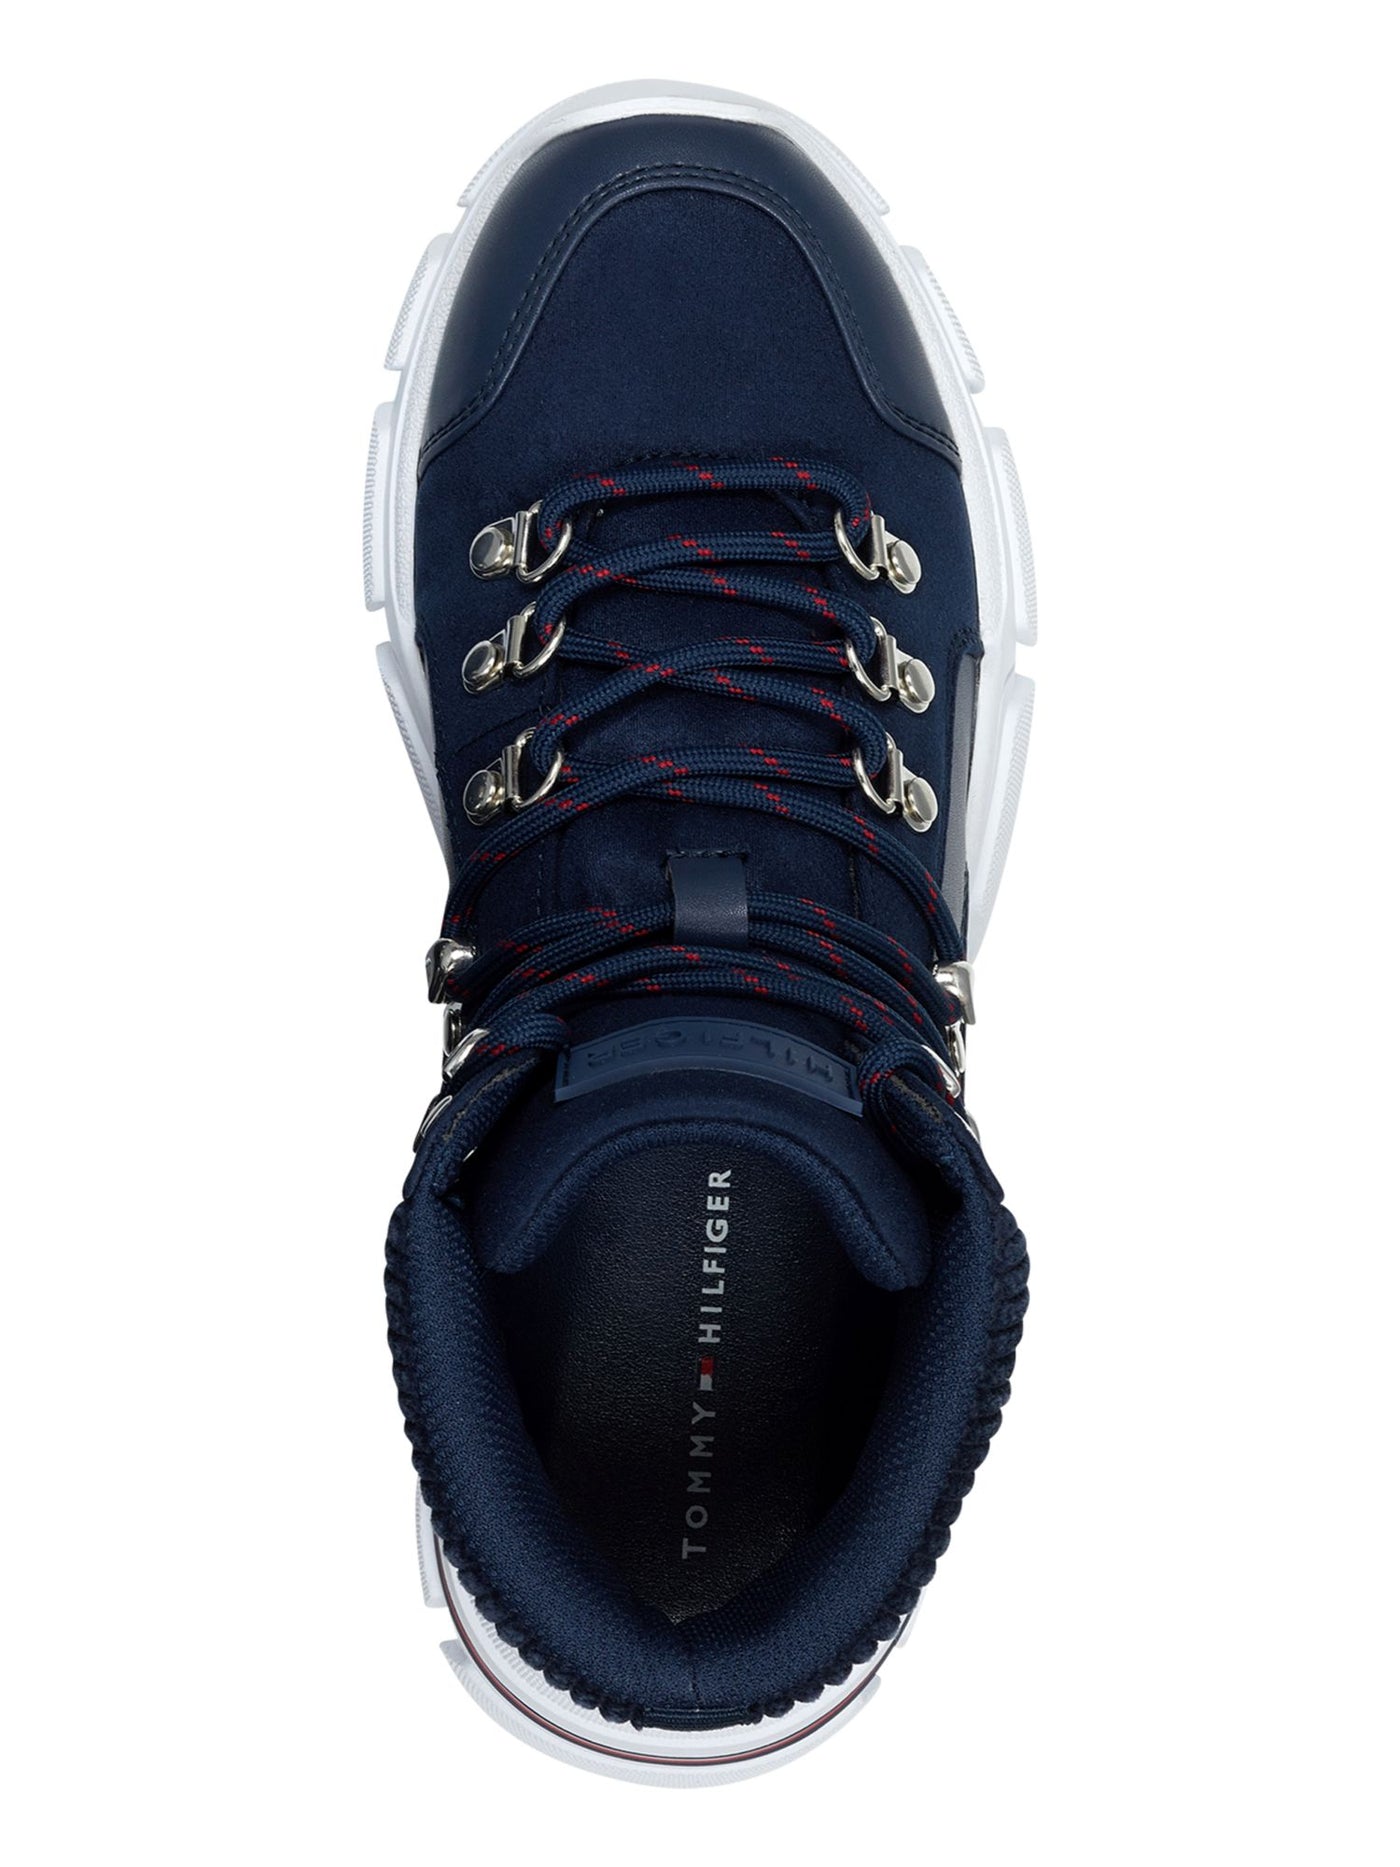 TOMMY HILFIGER Womens Navy Removable Insole 1" Platform Traction Sole Cushioned Logo Nesser Round Toe Block Heel Lace-Up Athletic Sneakers 6.5 M